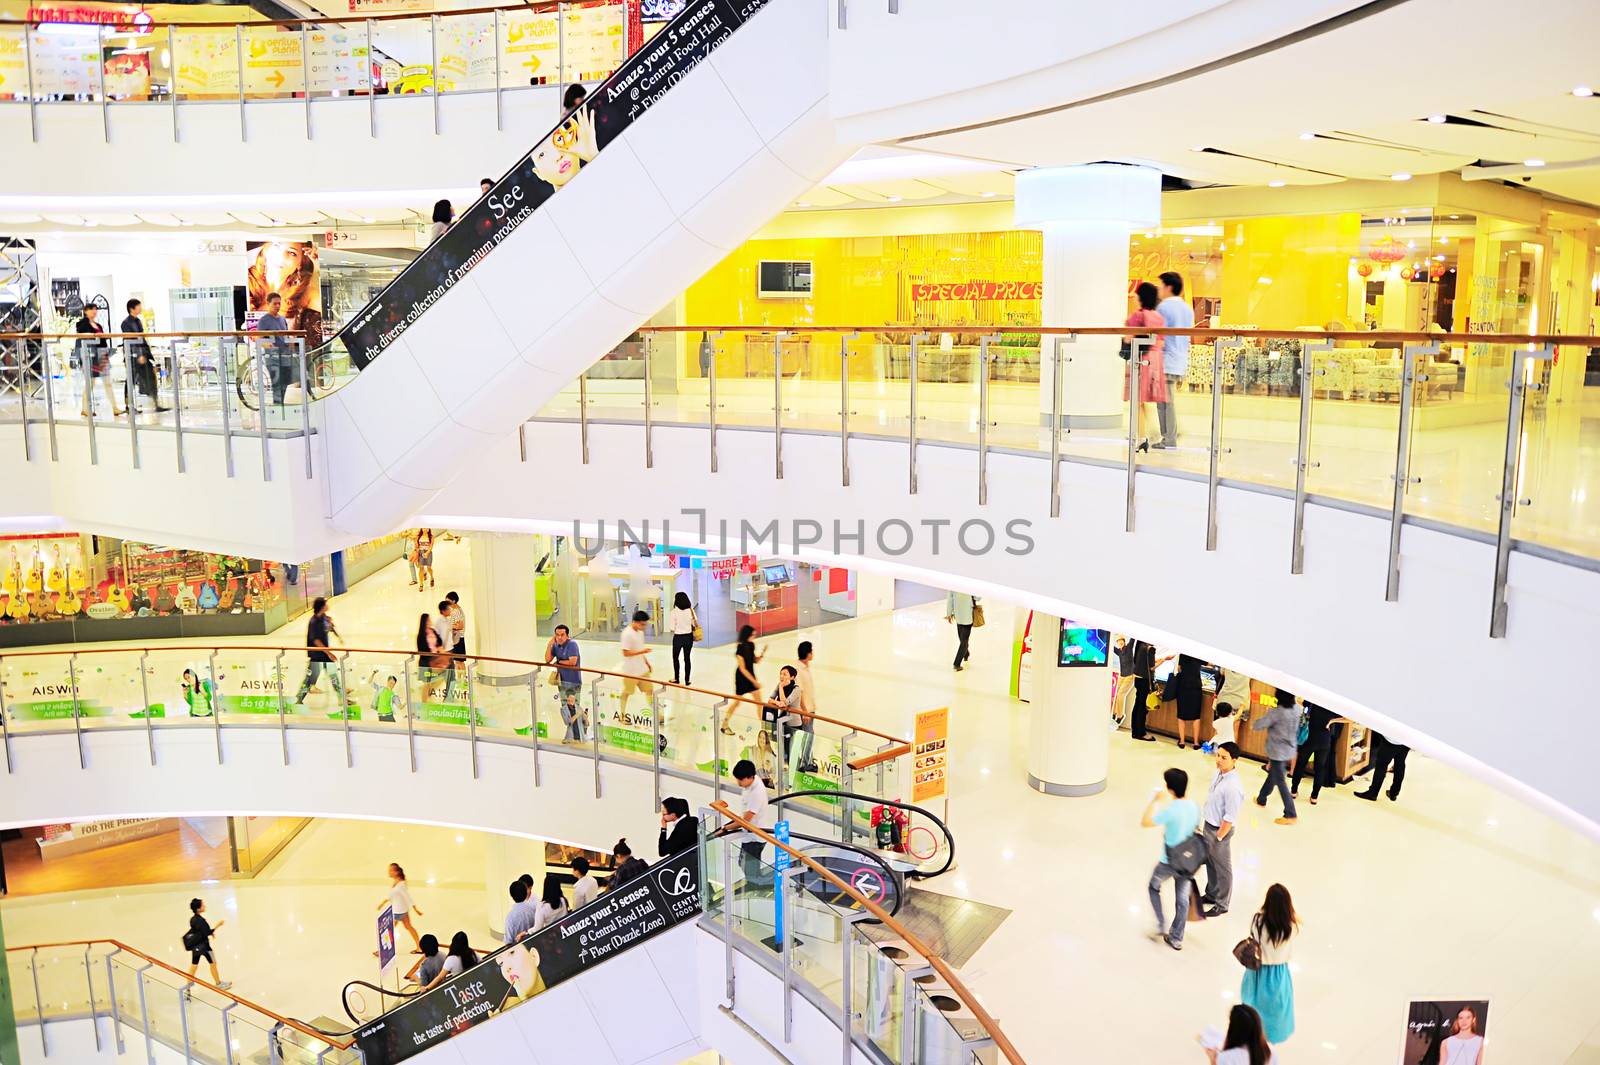 Bangkok, Thailand - March 04, 2013: People at Central World shopping plaza  in Bangkok. It's the third largest shopping complex in the world. Central World has 550,000 square metres of shopping mall